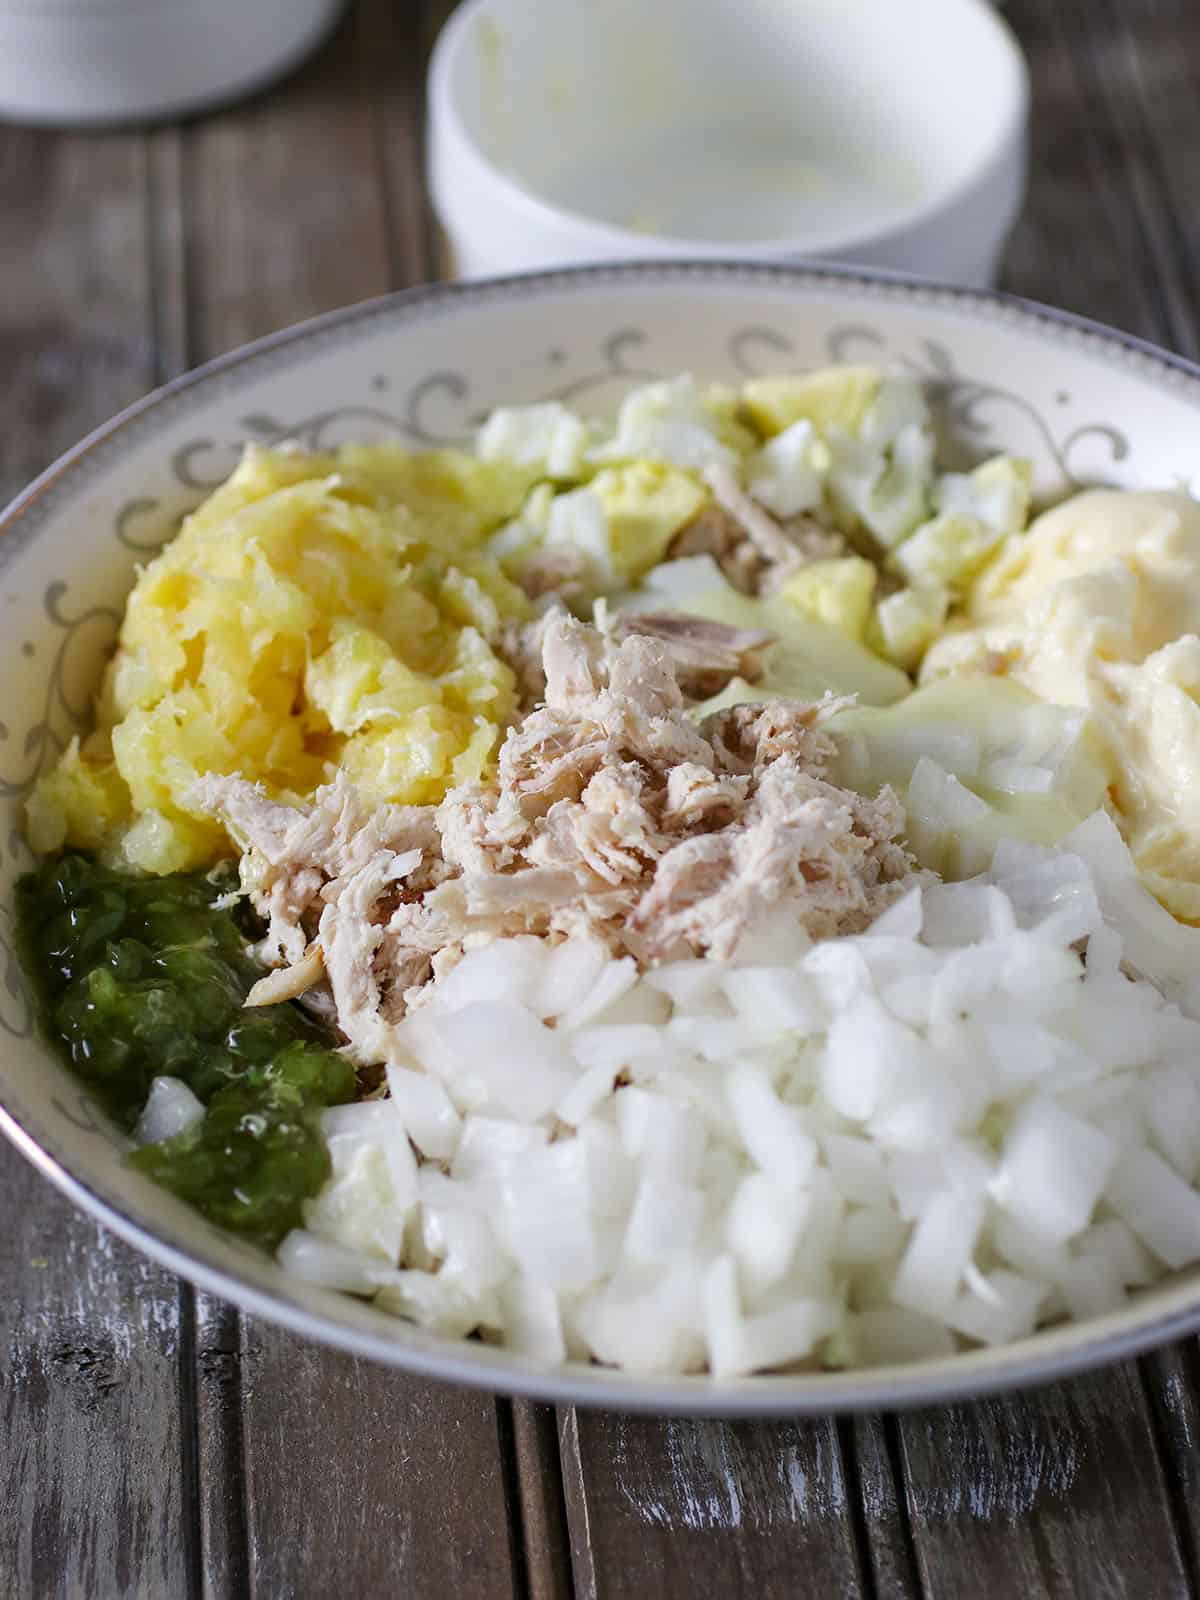 shredded chicken, chopped onions, eggs, sweet relish, and mayonnaise in a large bowl